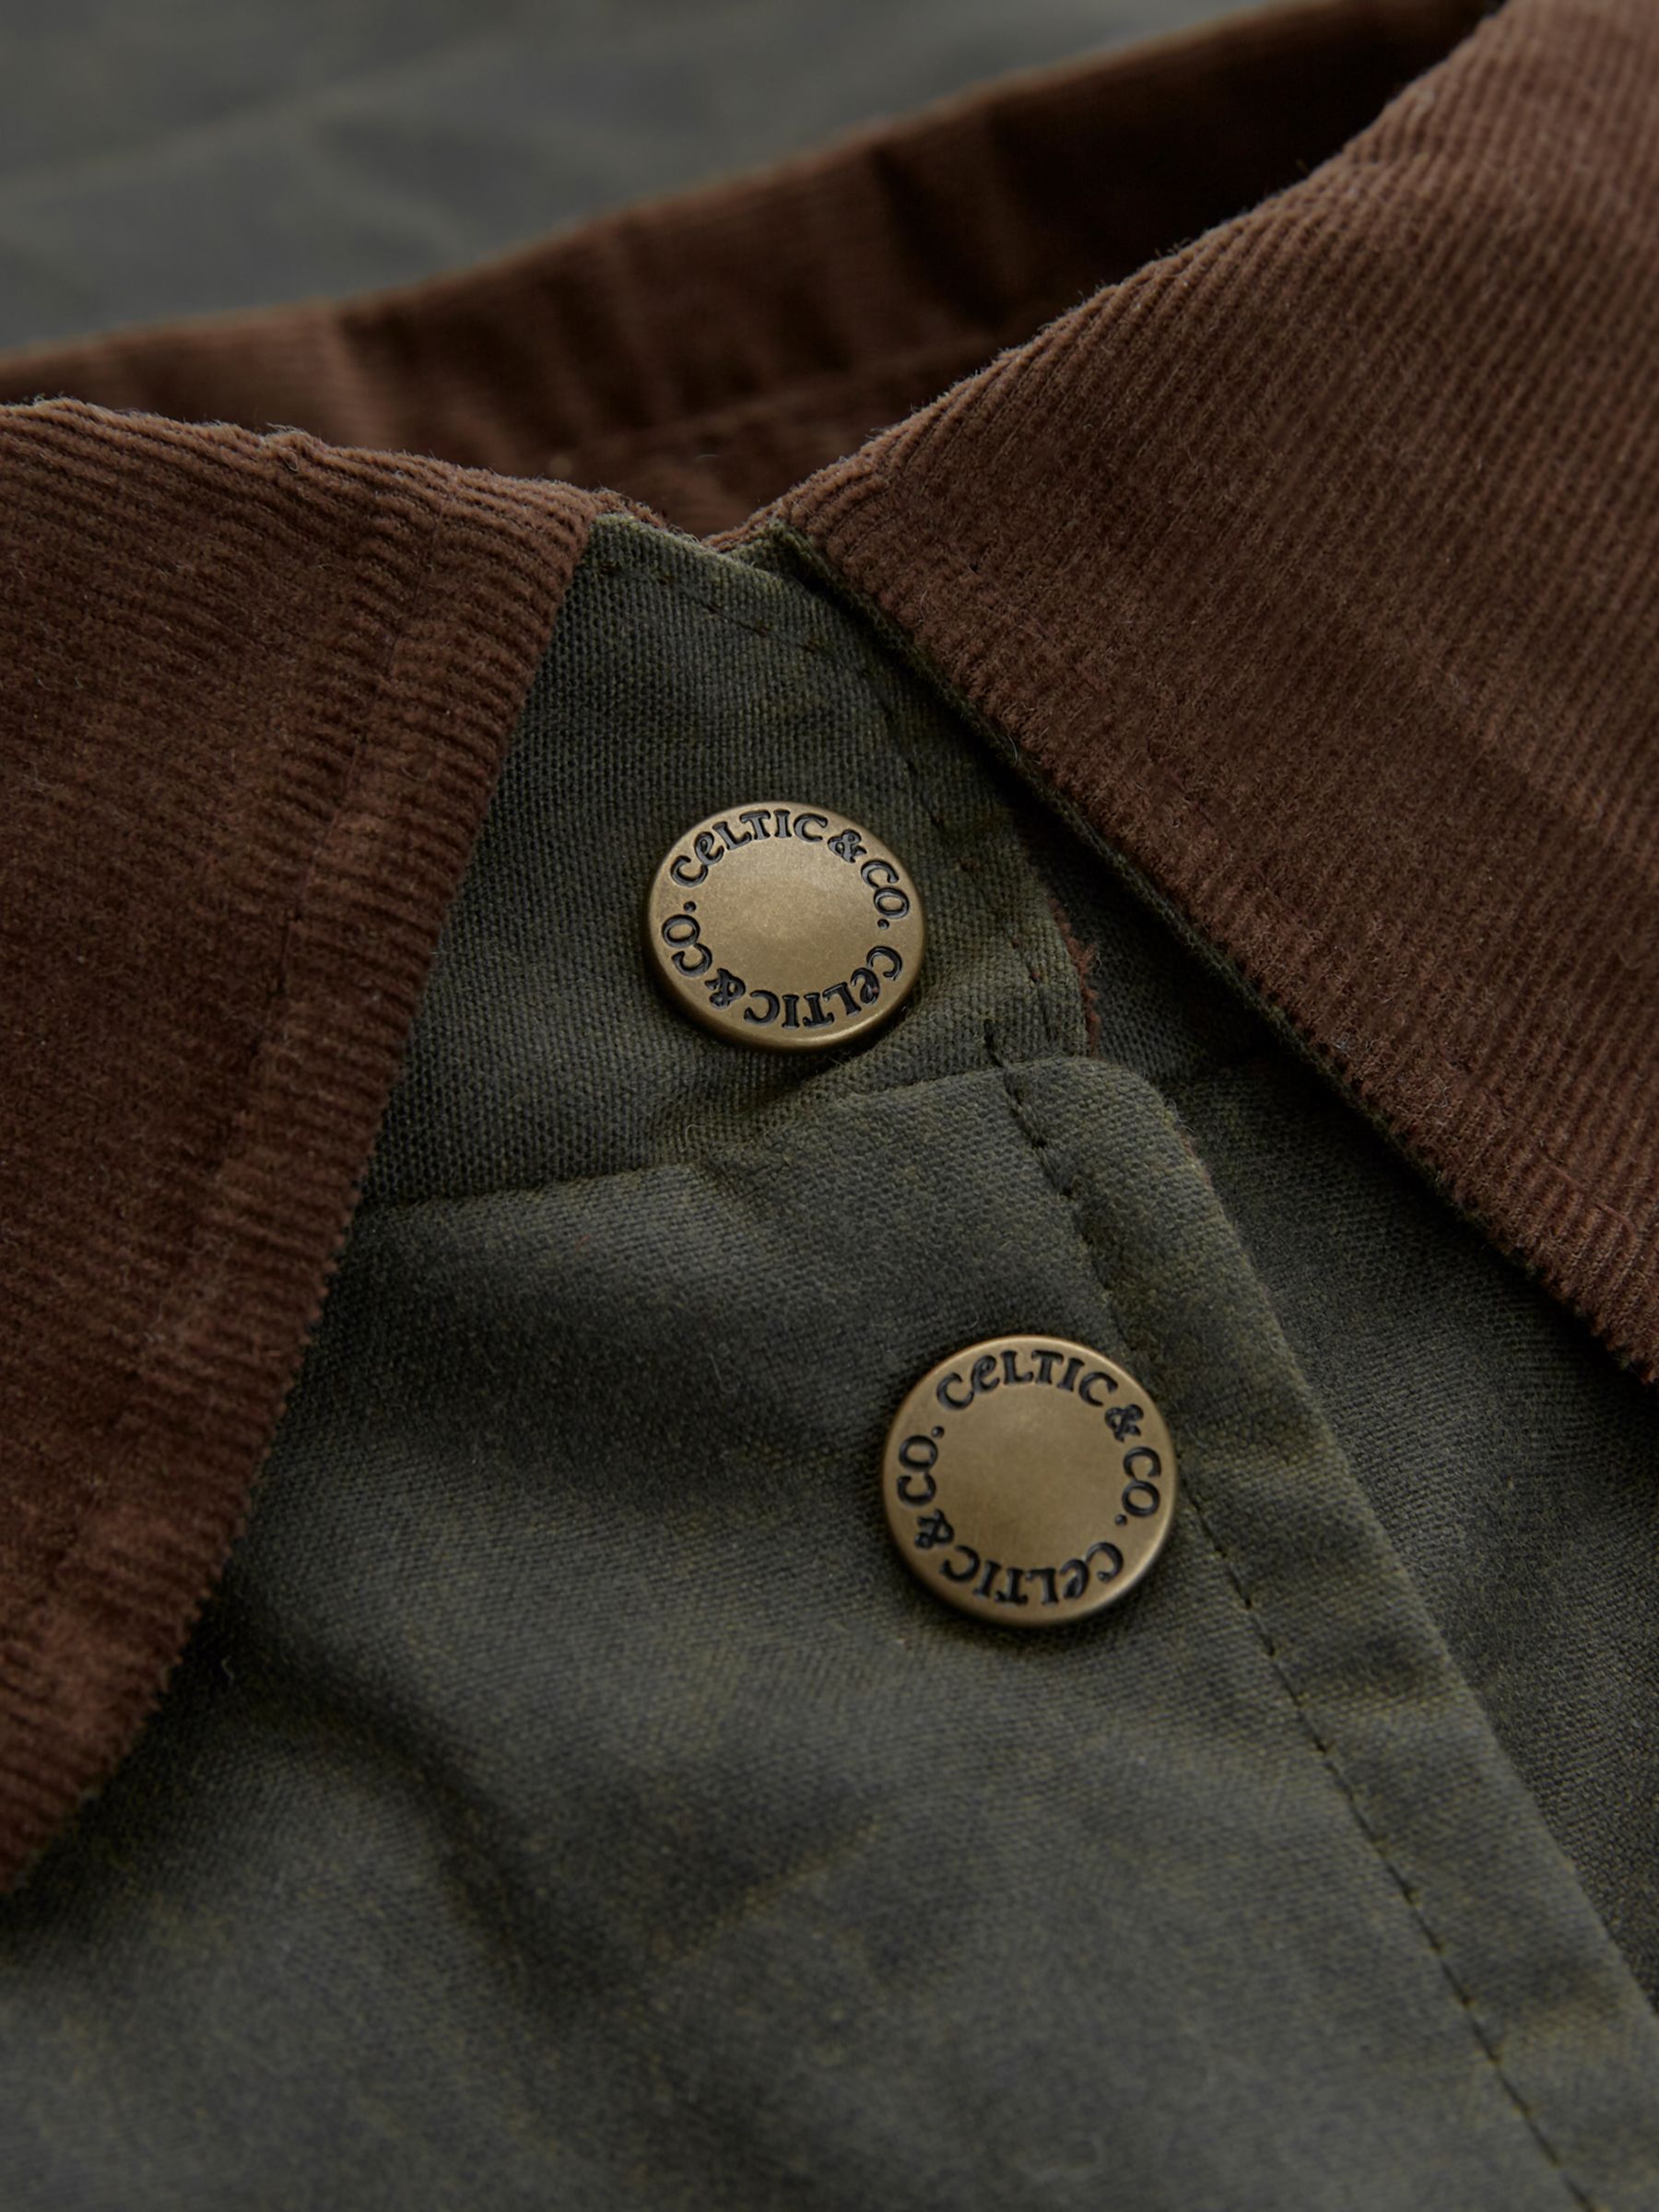 Celtic & Co. Wax Cotton Overshirt, Olive at John Lewis & Partners